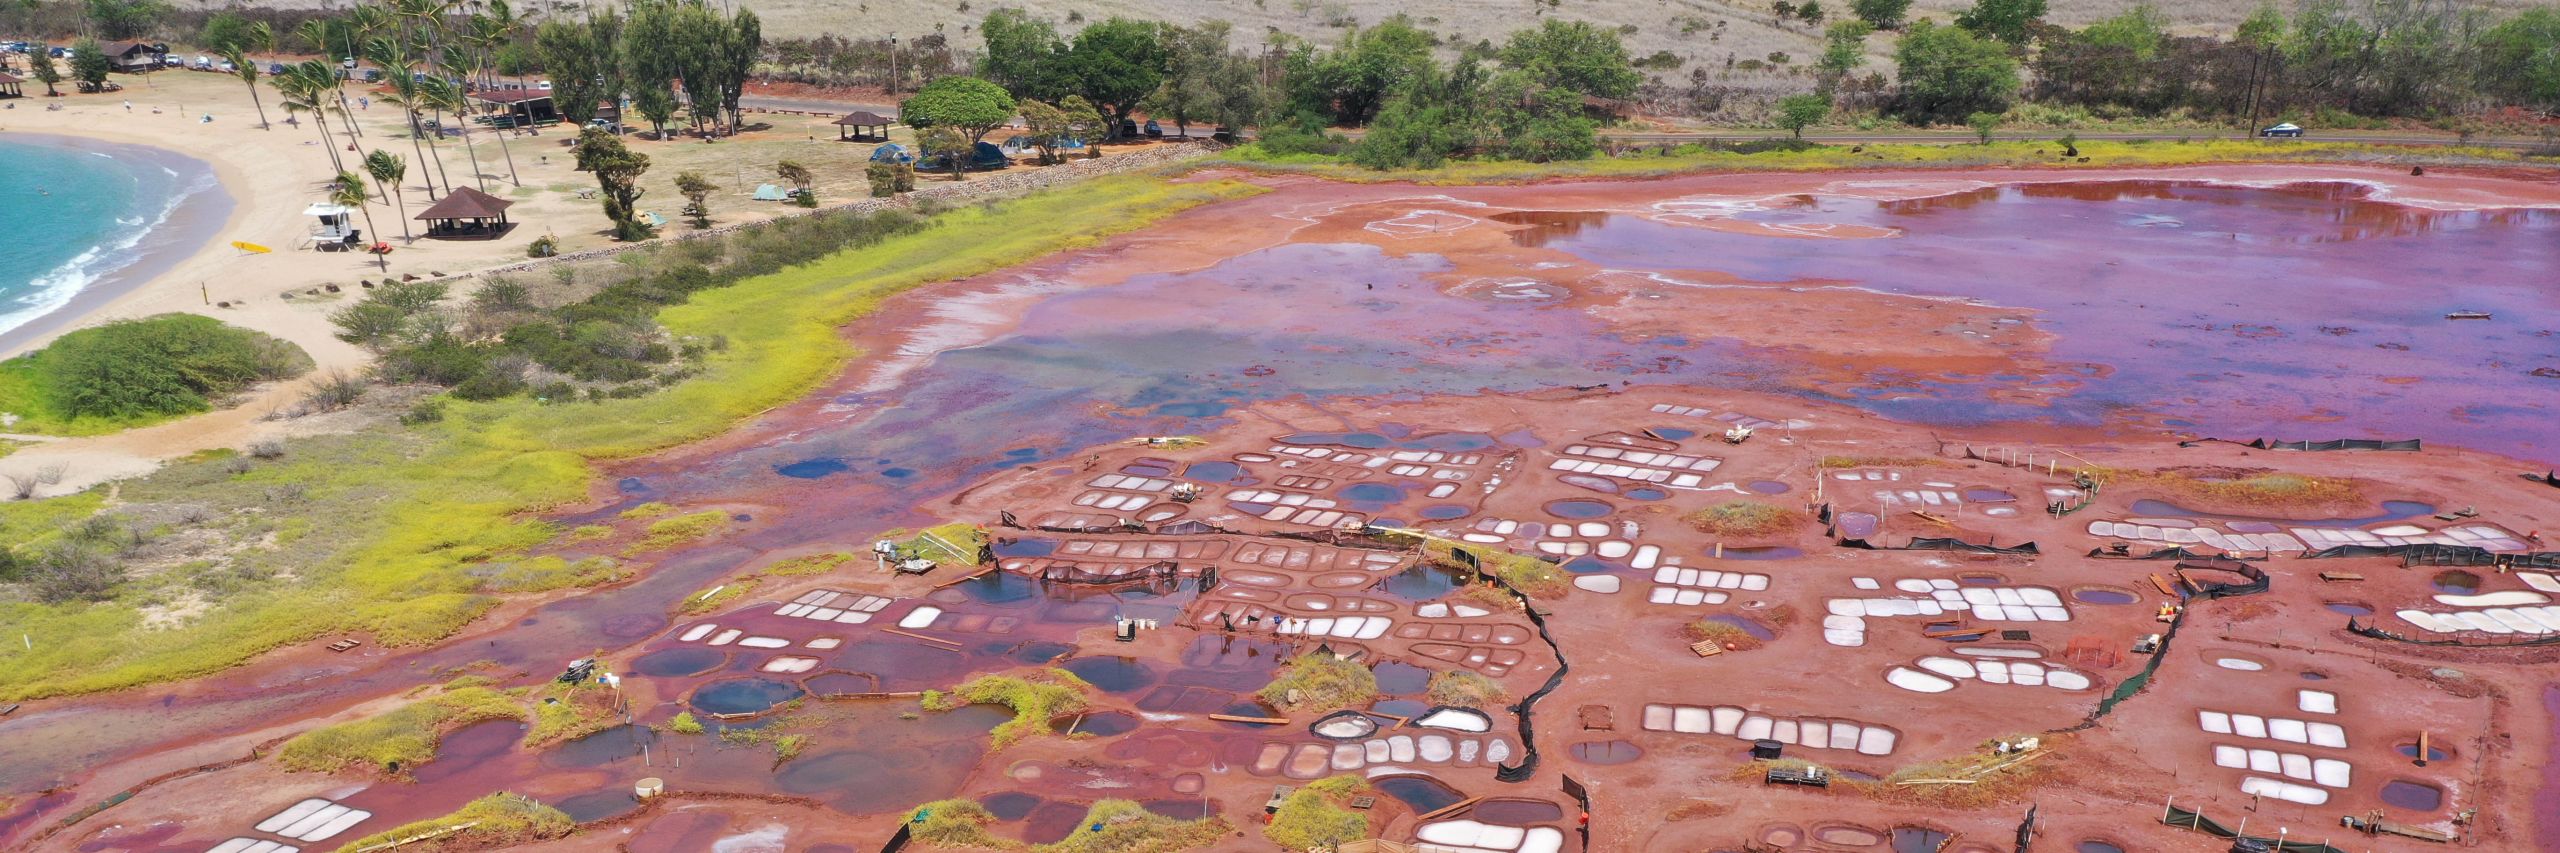 Aerial view of coastal salt ponds surrounded by red soil